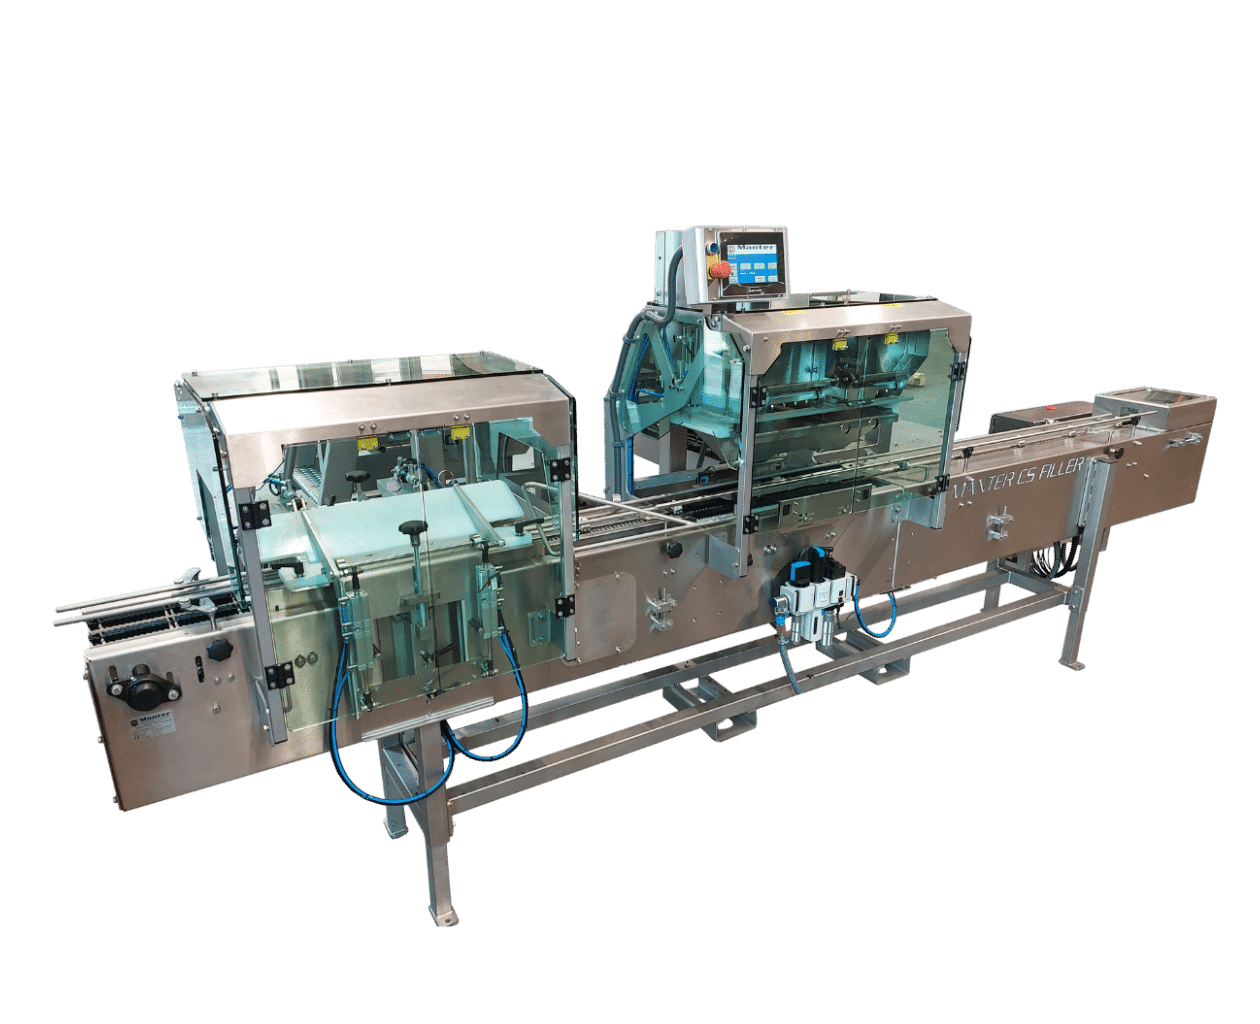 Clamshell Filler - Packaging machine for clamshells